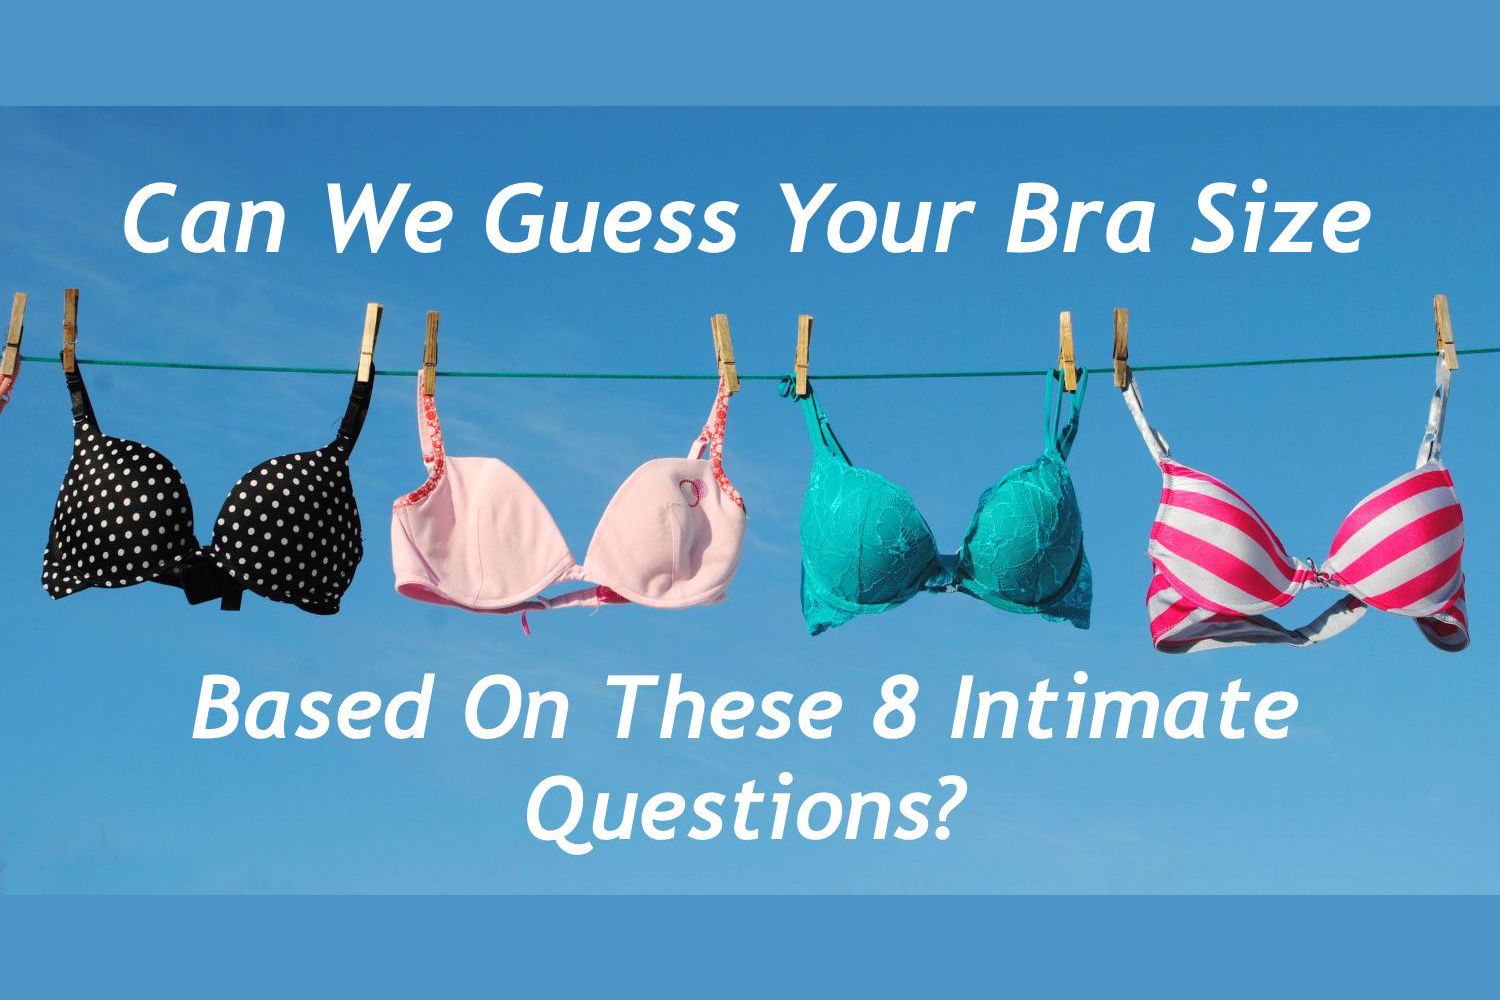 Can We Guess Your Bra Size In These 8 Intimate Questions?